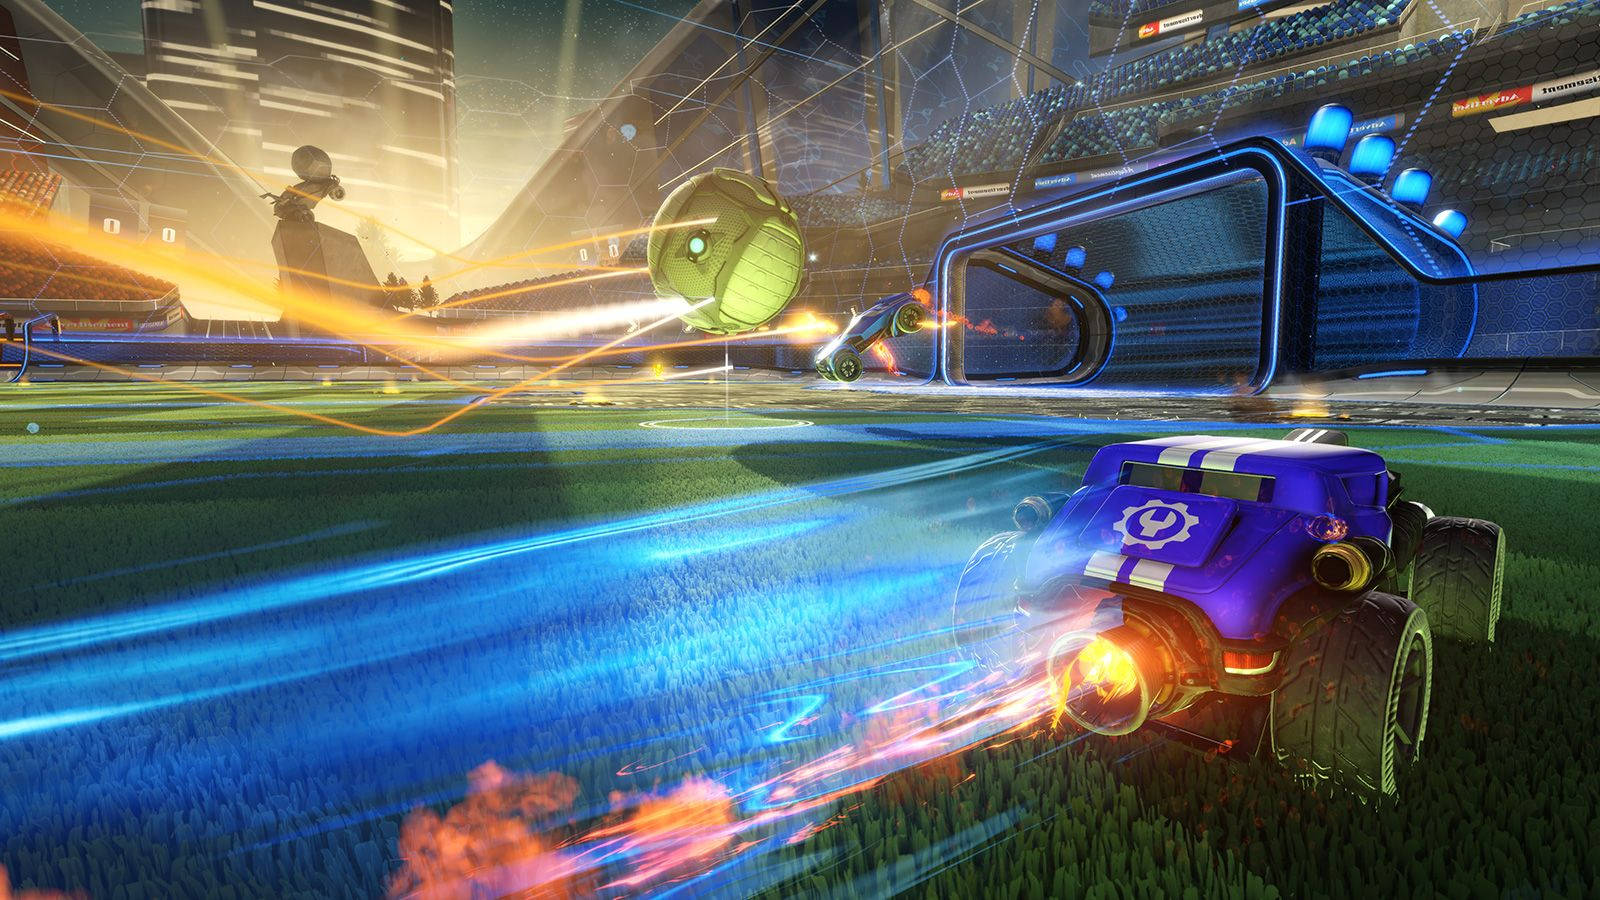 Cool Rocket League Game Background